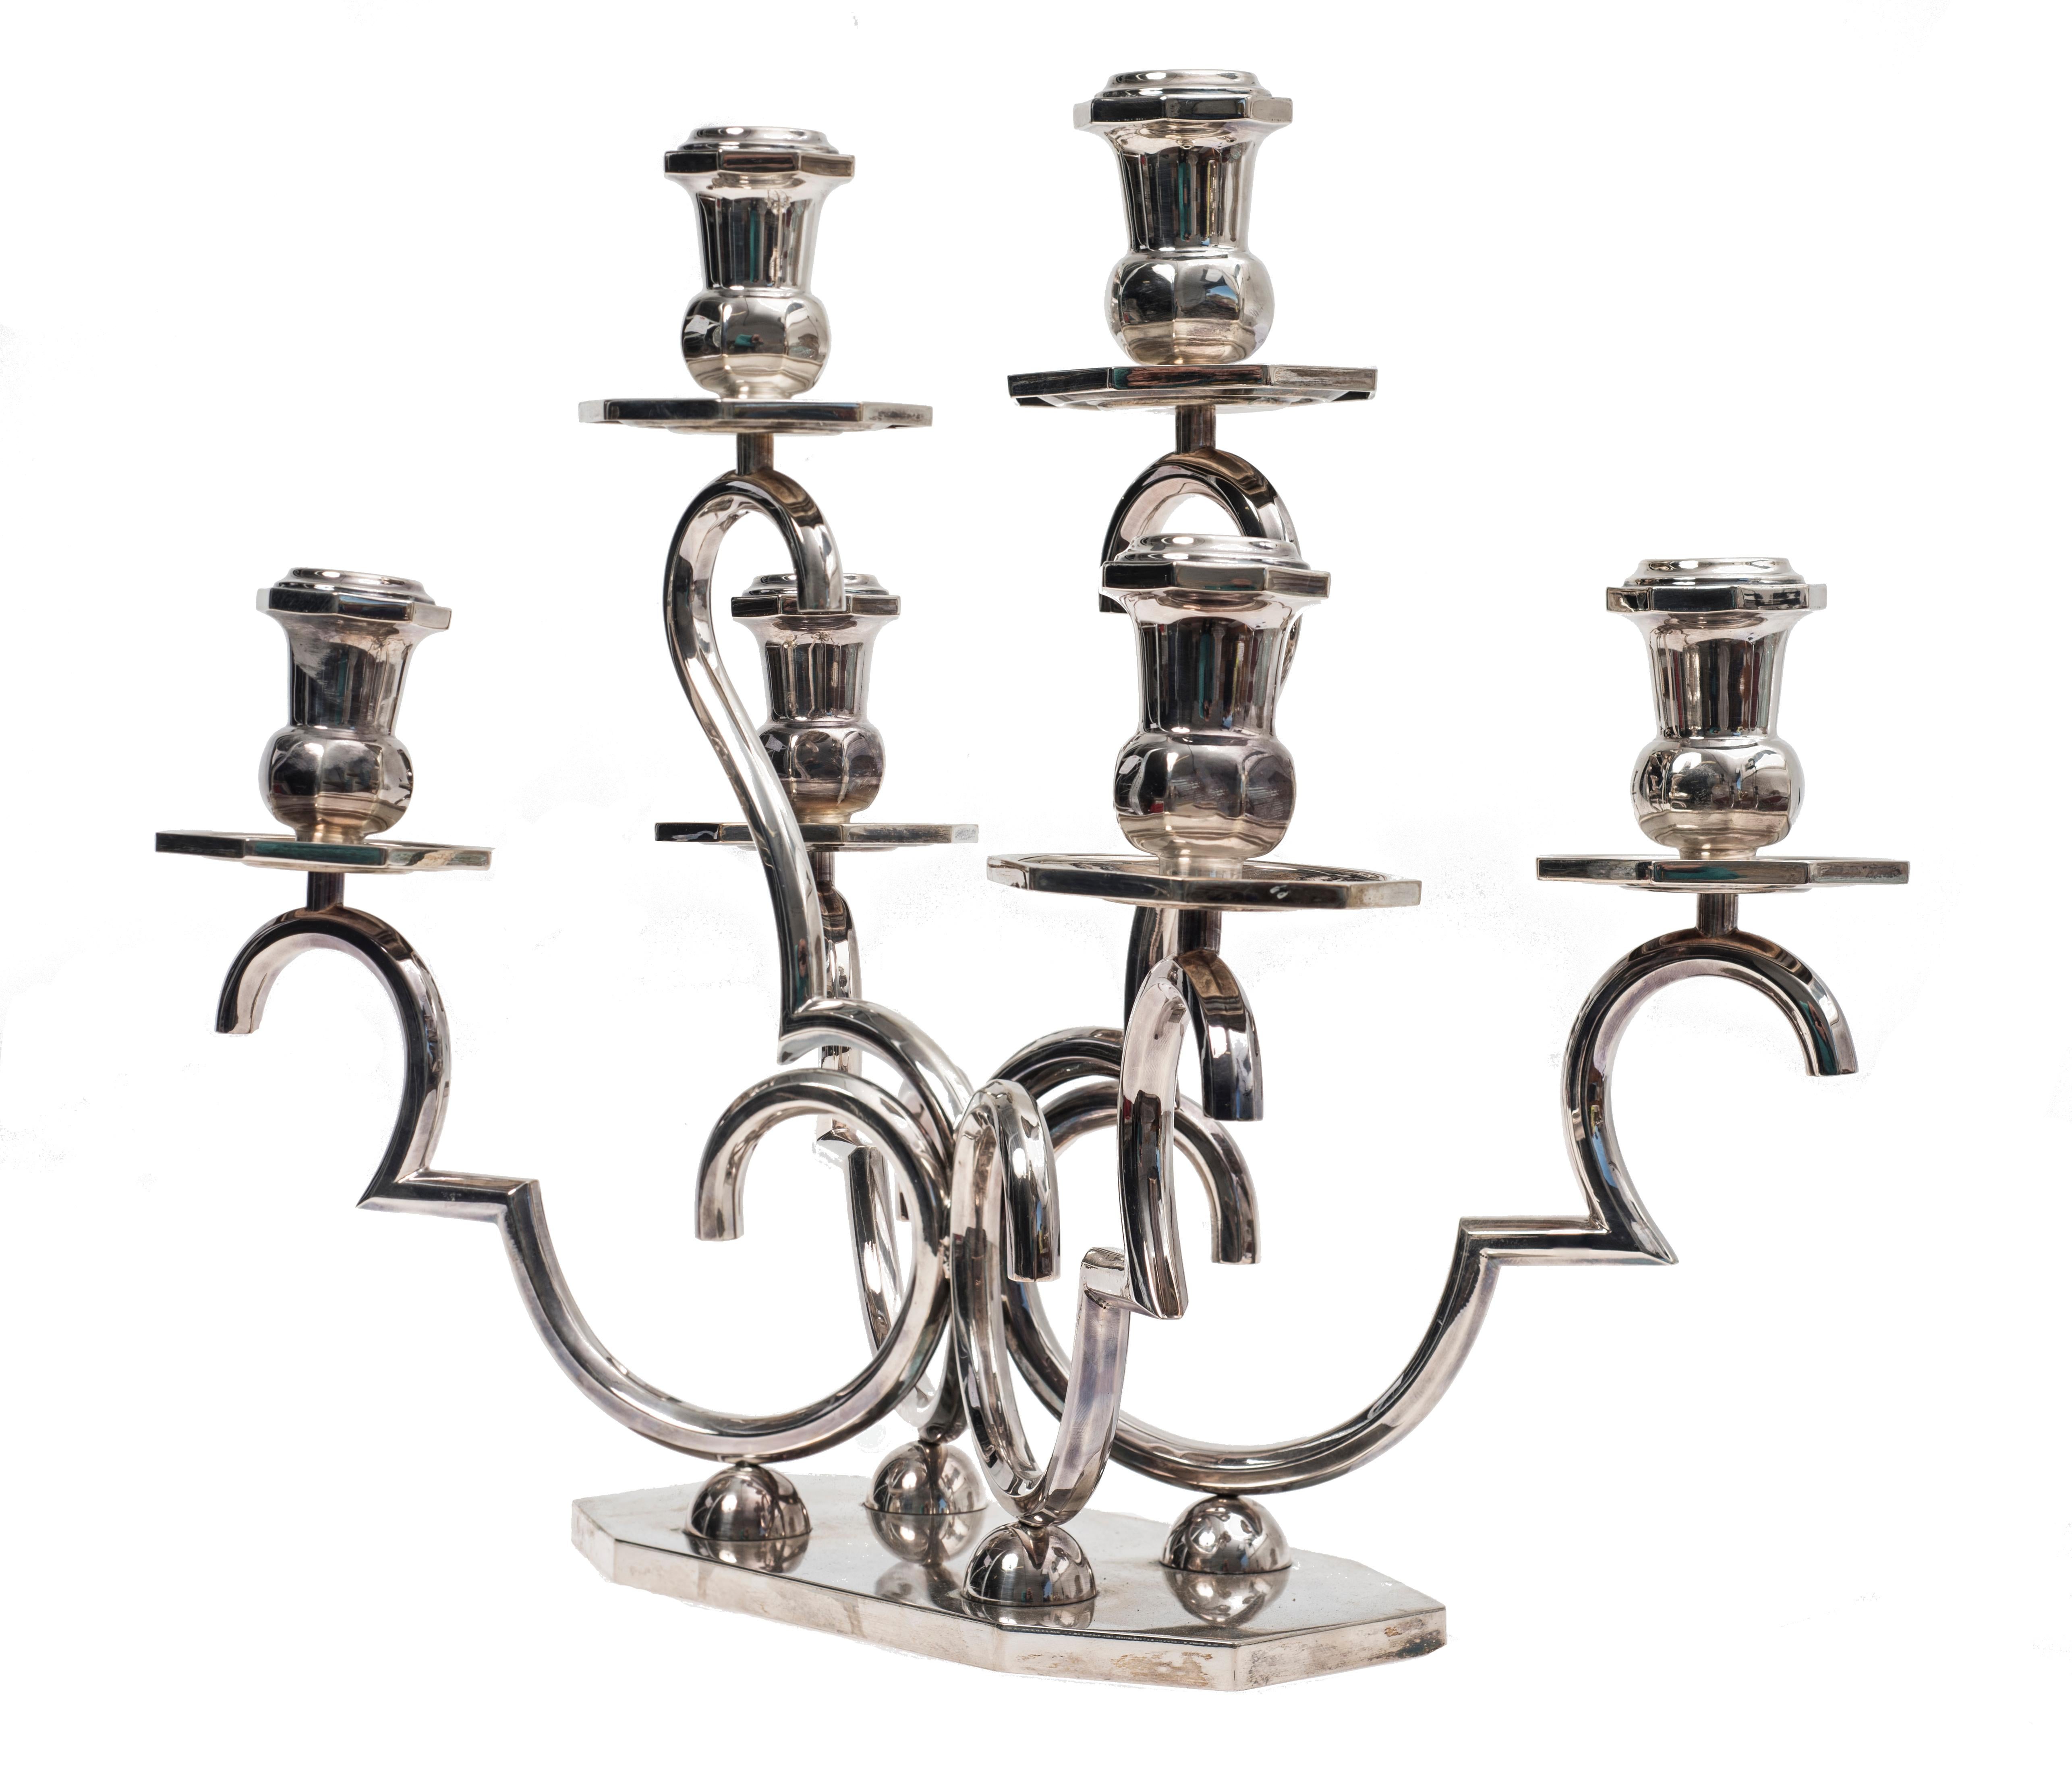 Vintage six arms silver candleholder, 20th century.
Very good conditions.
Weight: Kg 2,480.